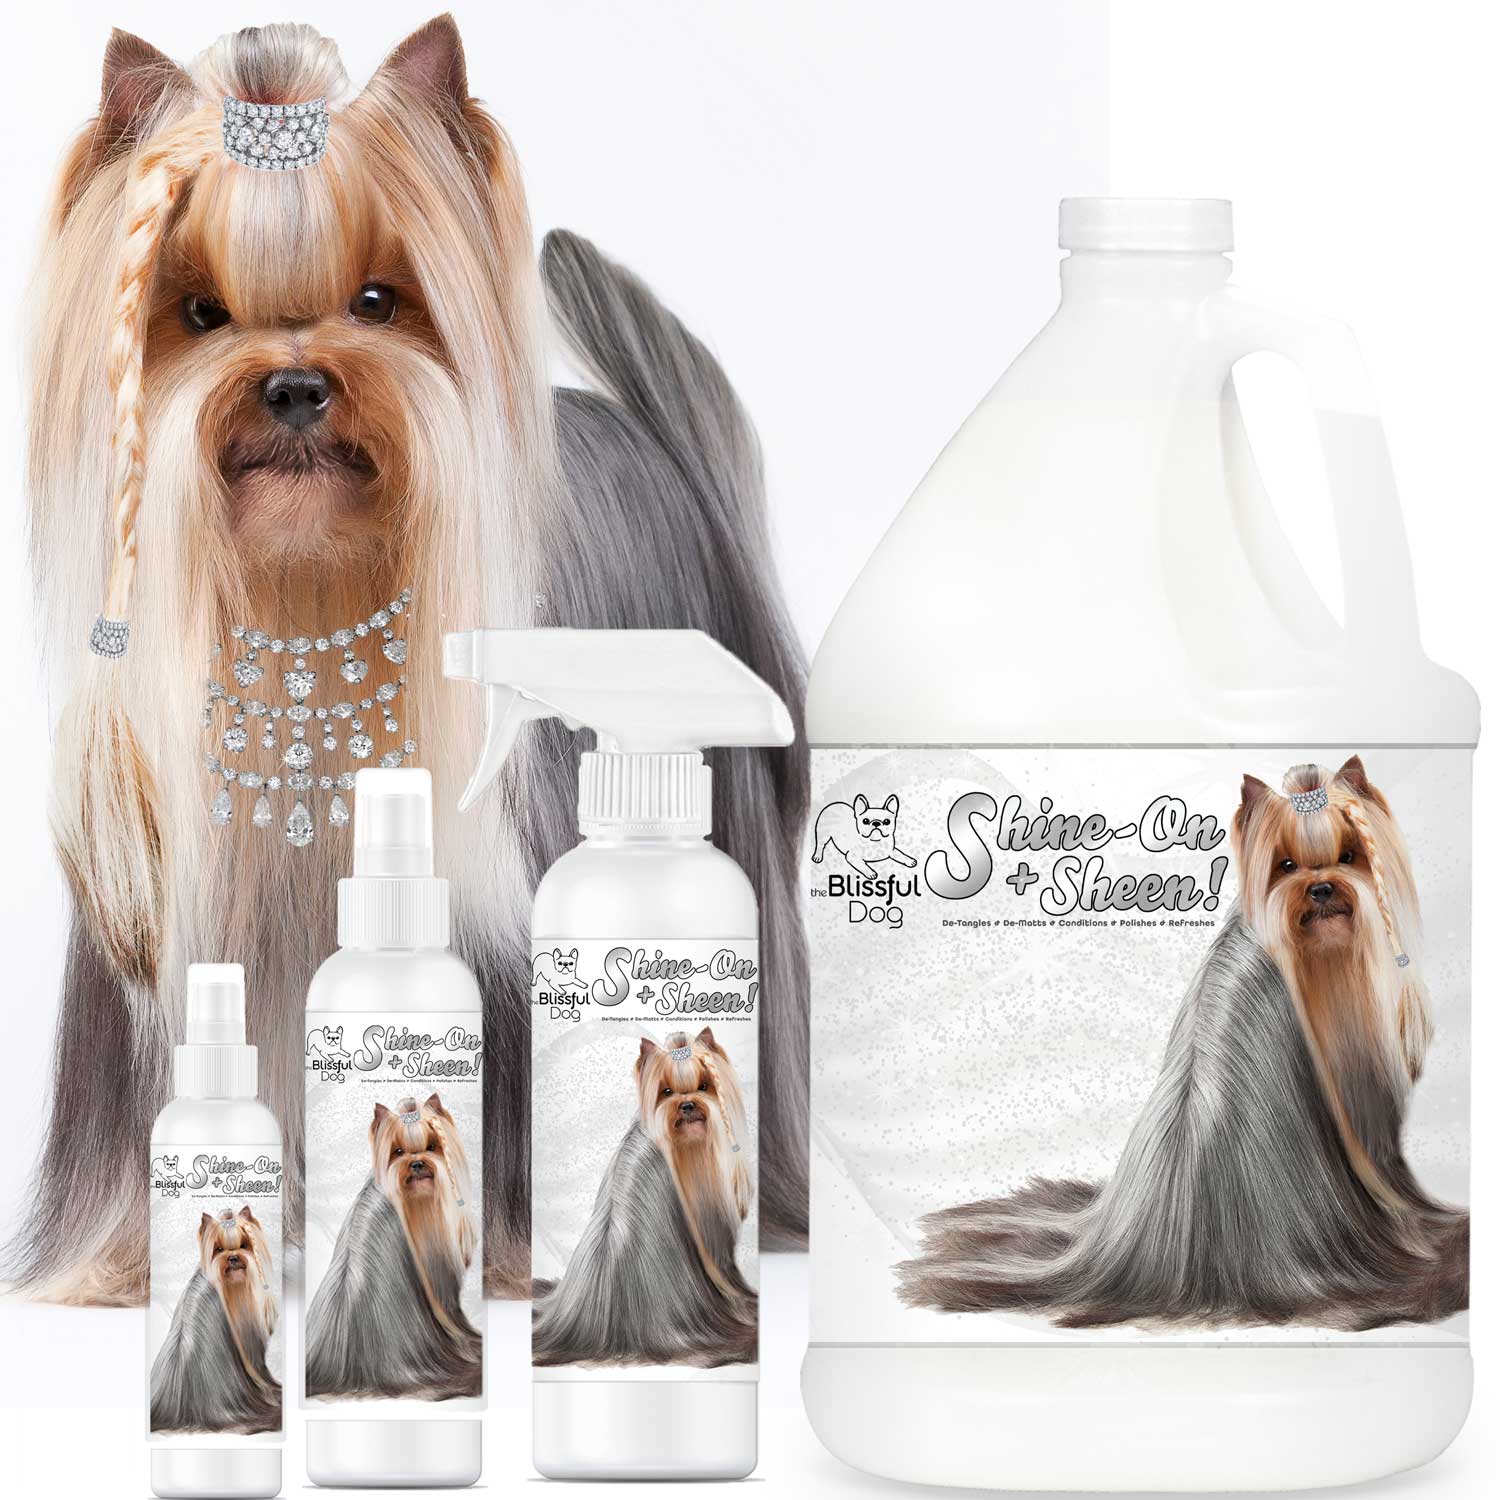 The Blissful Dog Shine-On + Sheen Coat Spray, All Natural, Leave-In Conditioner and Coat Detangler for Your Dog, 4 oz